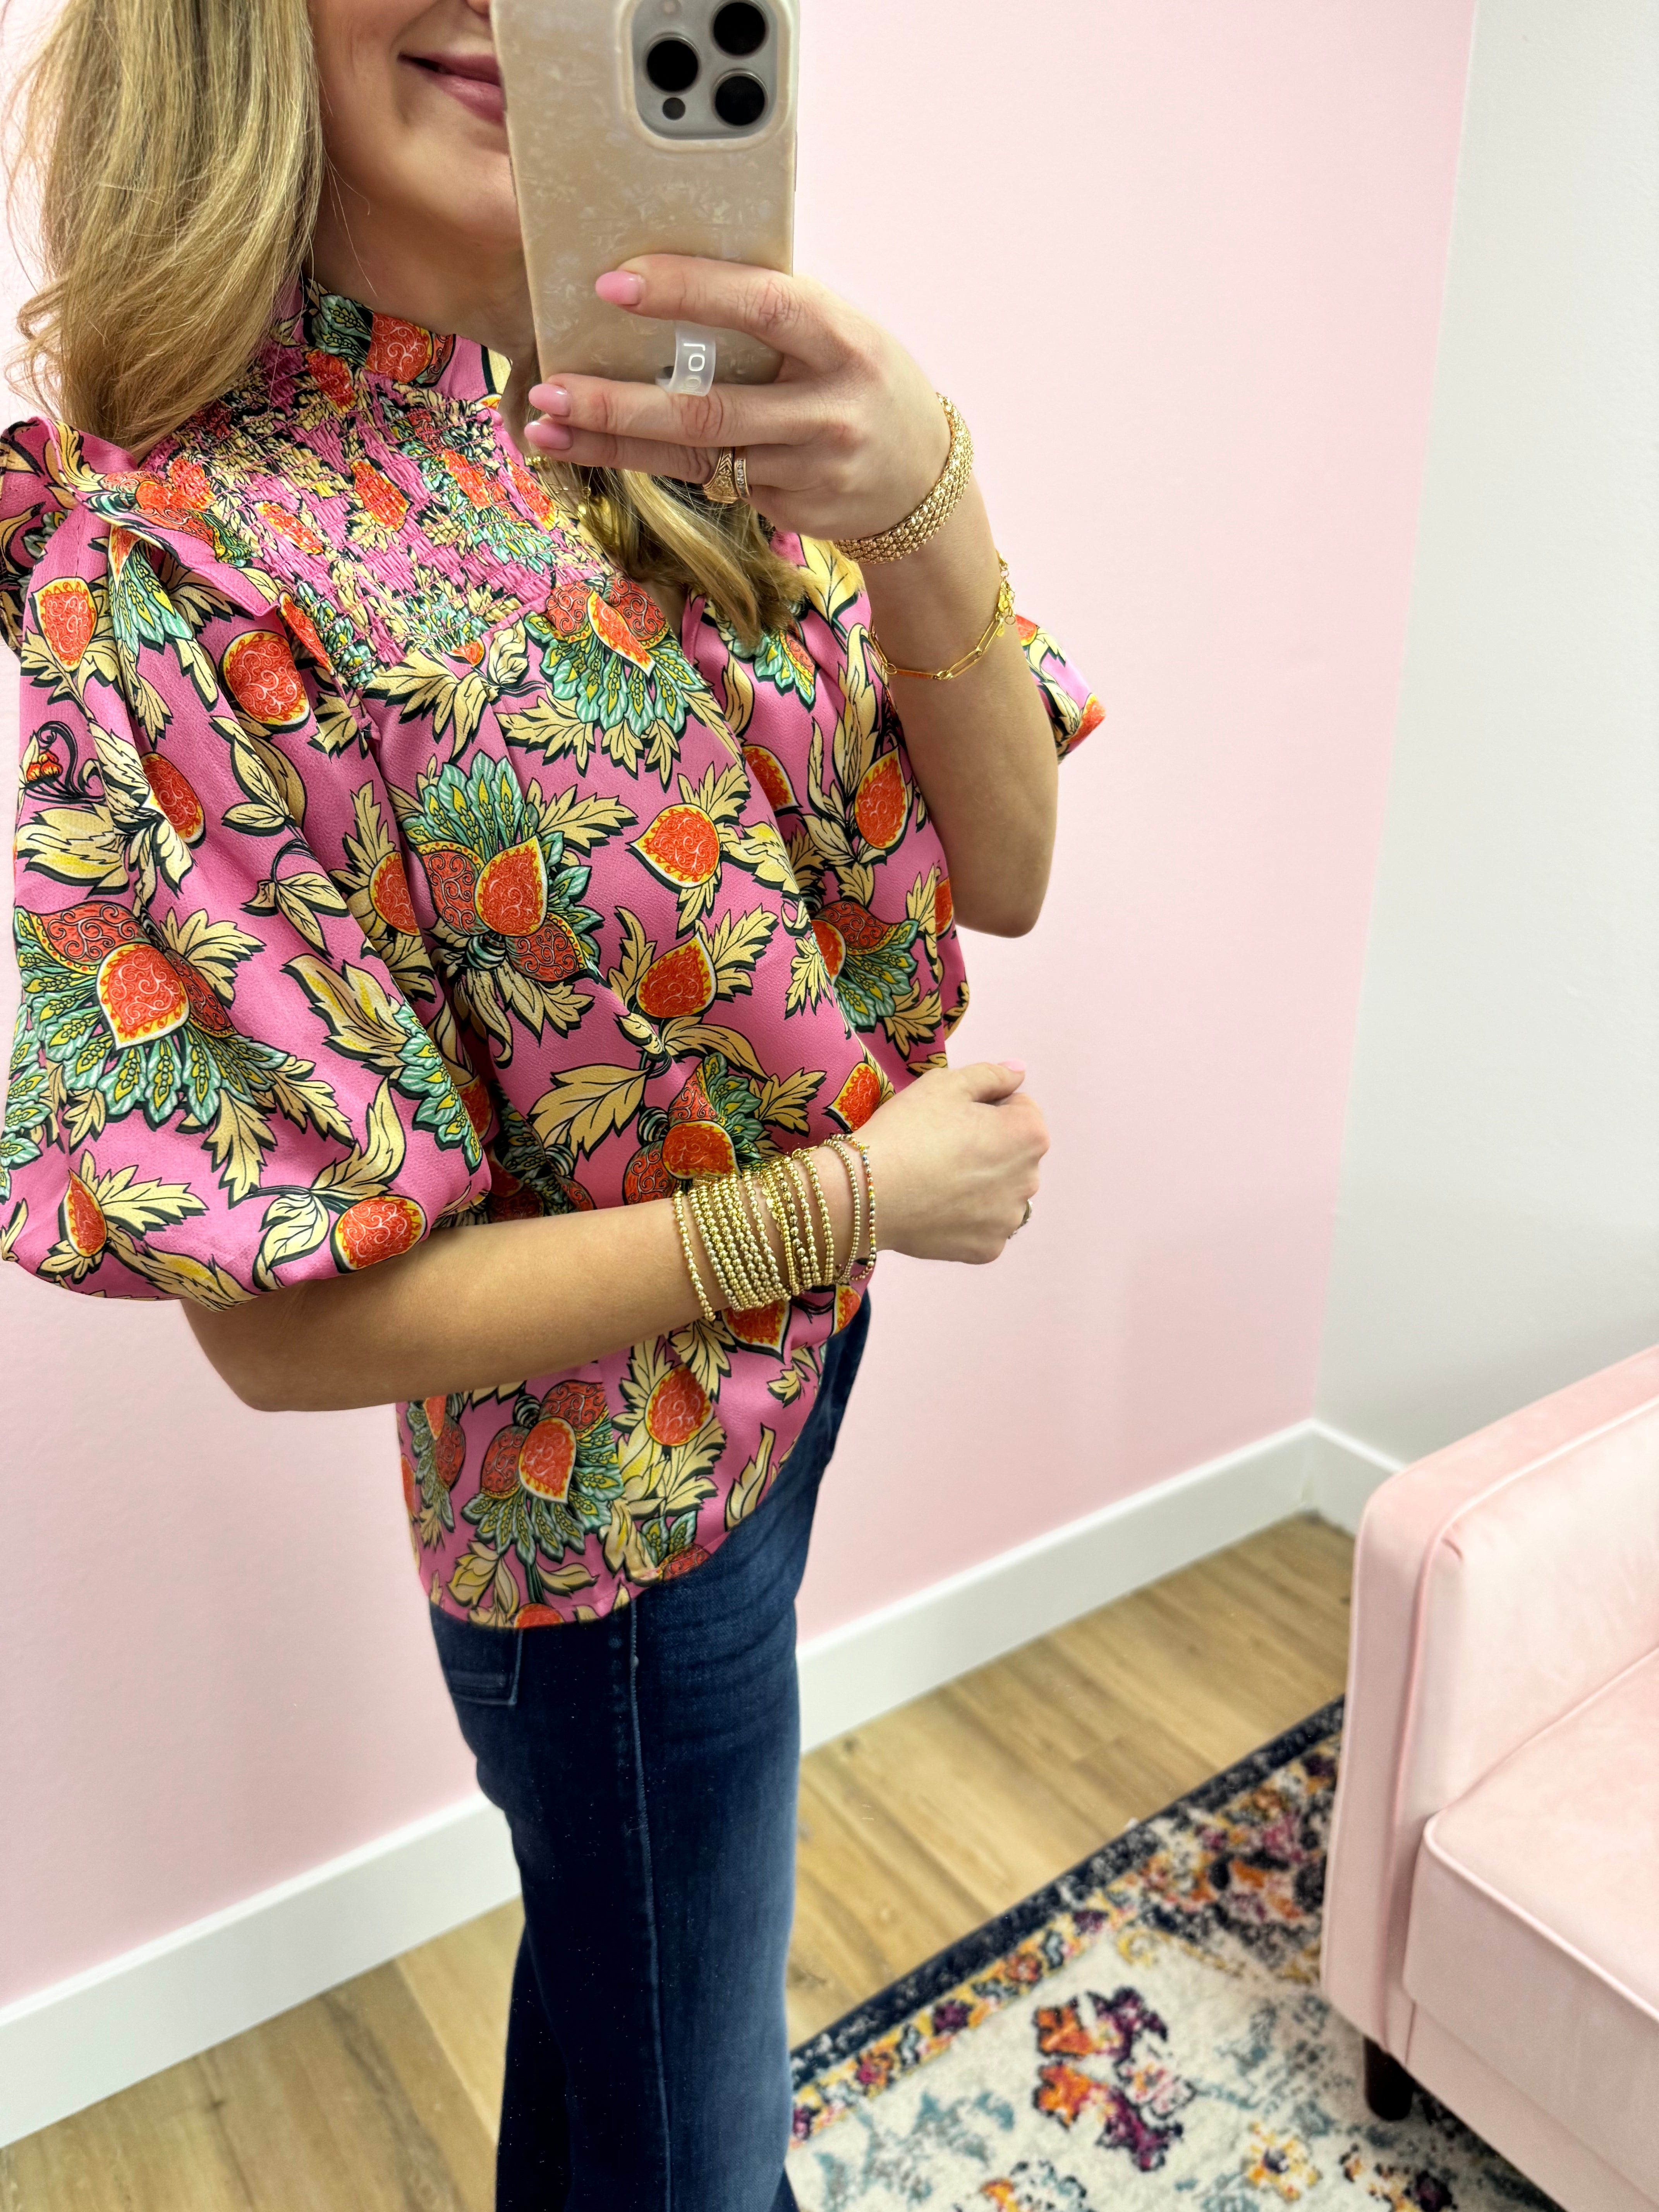 THML Pink Floral Smocked Top Puff Sleeve